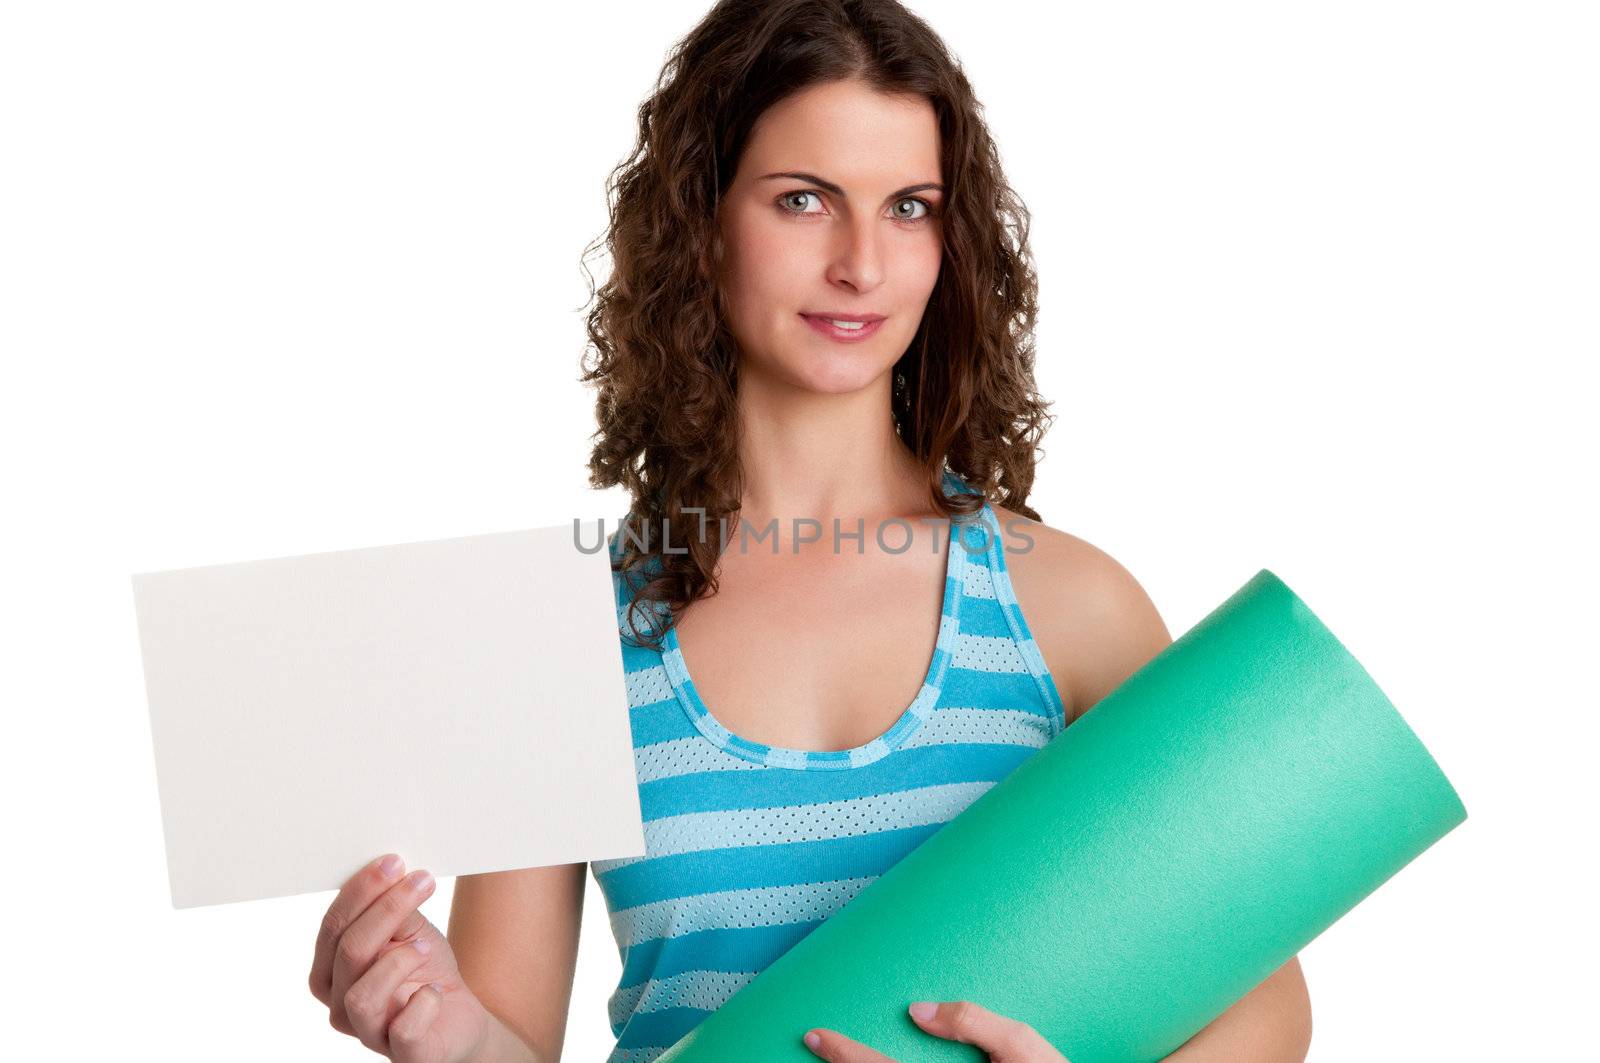 Woman holding a yoga mat and a white empty card, isolated in a white background